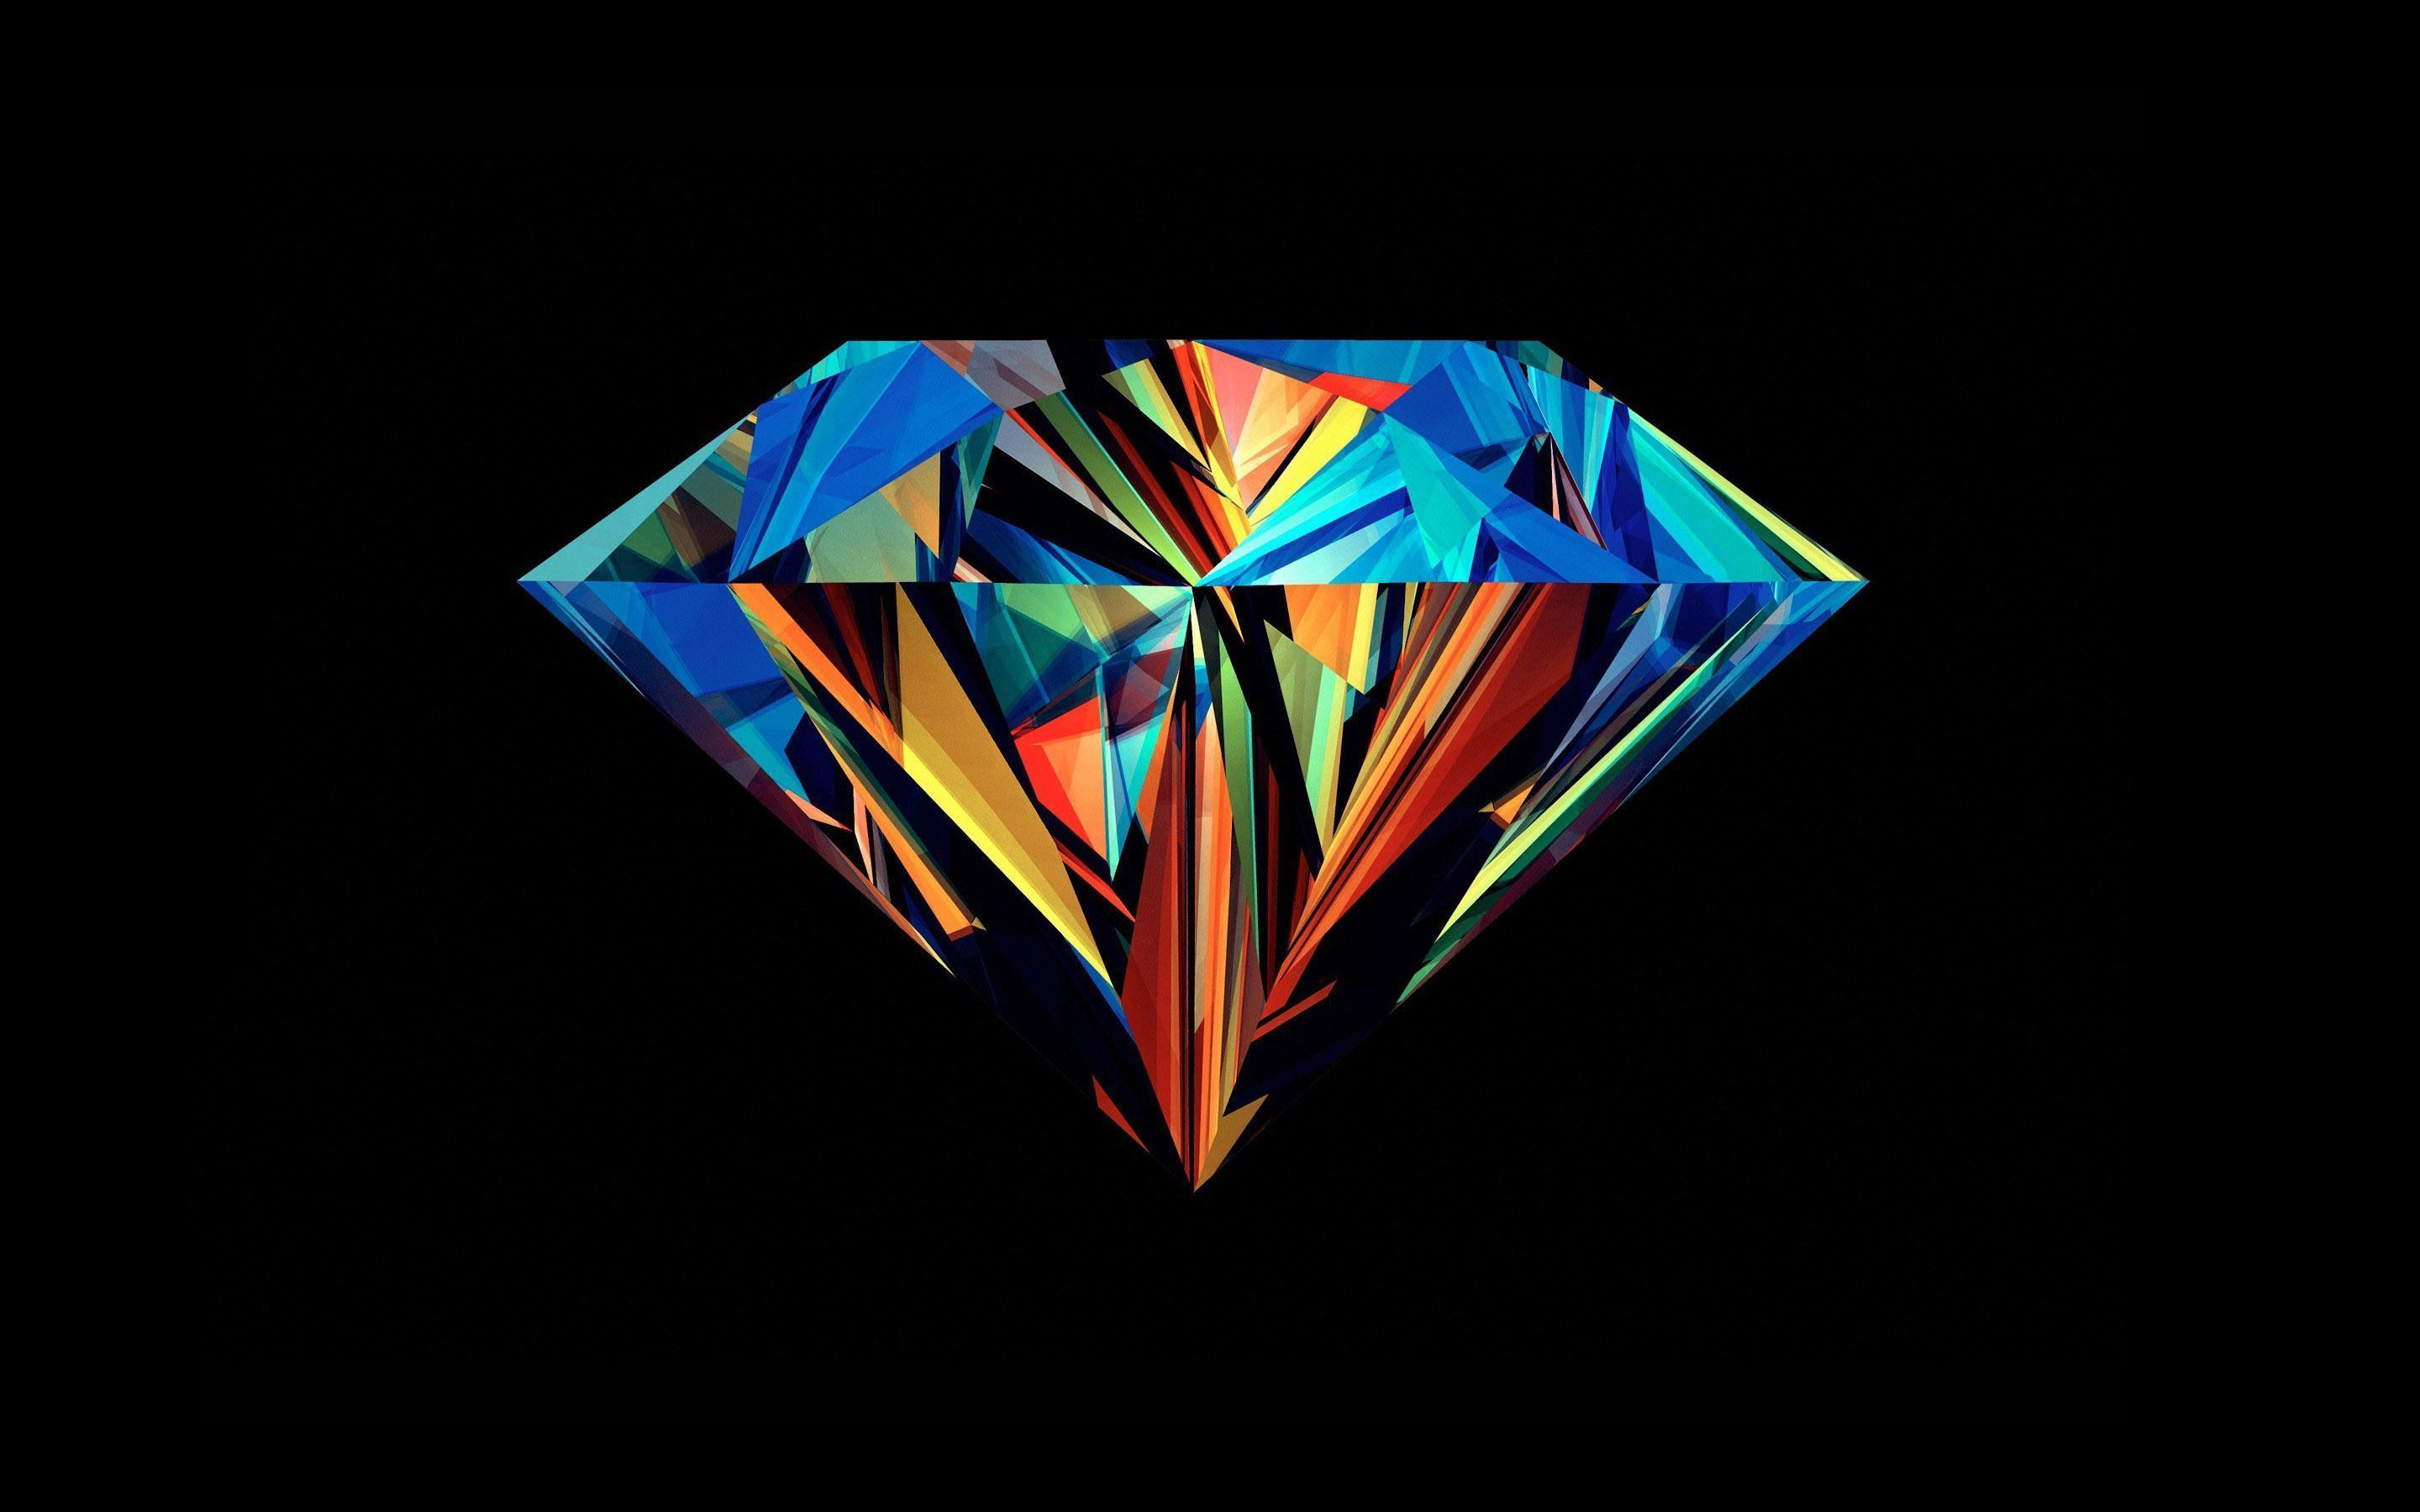 A diamond shaped object with colorful lines - Diamond